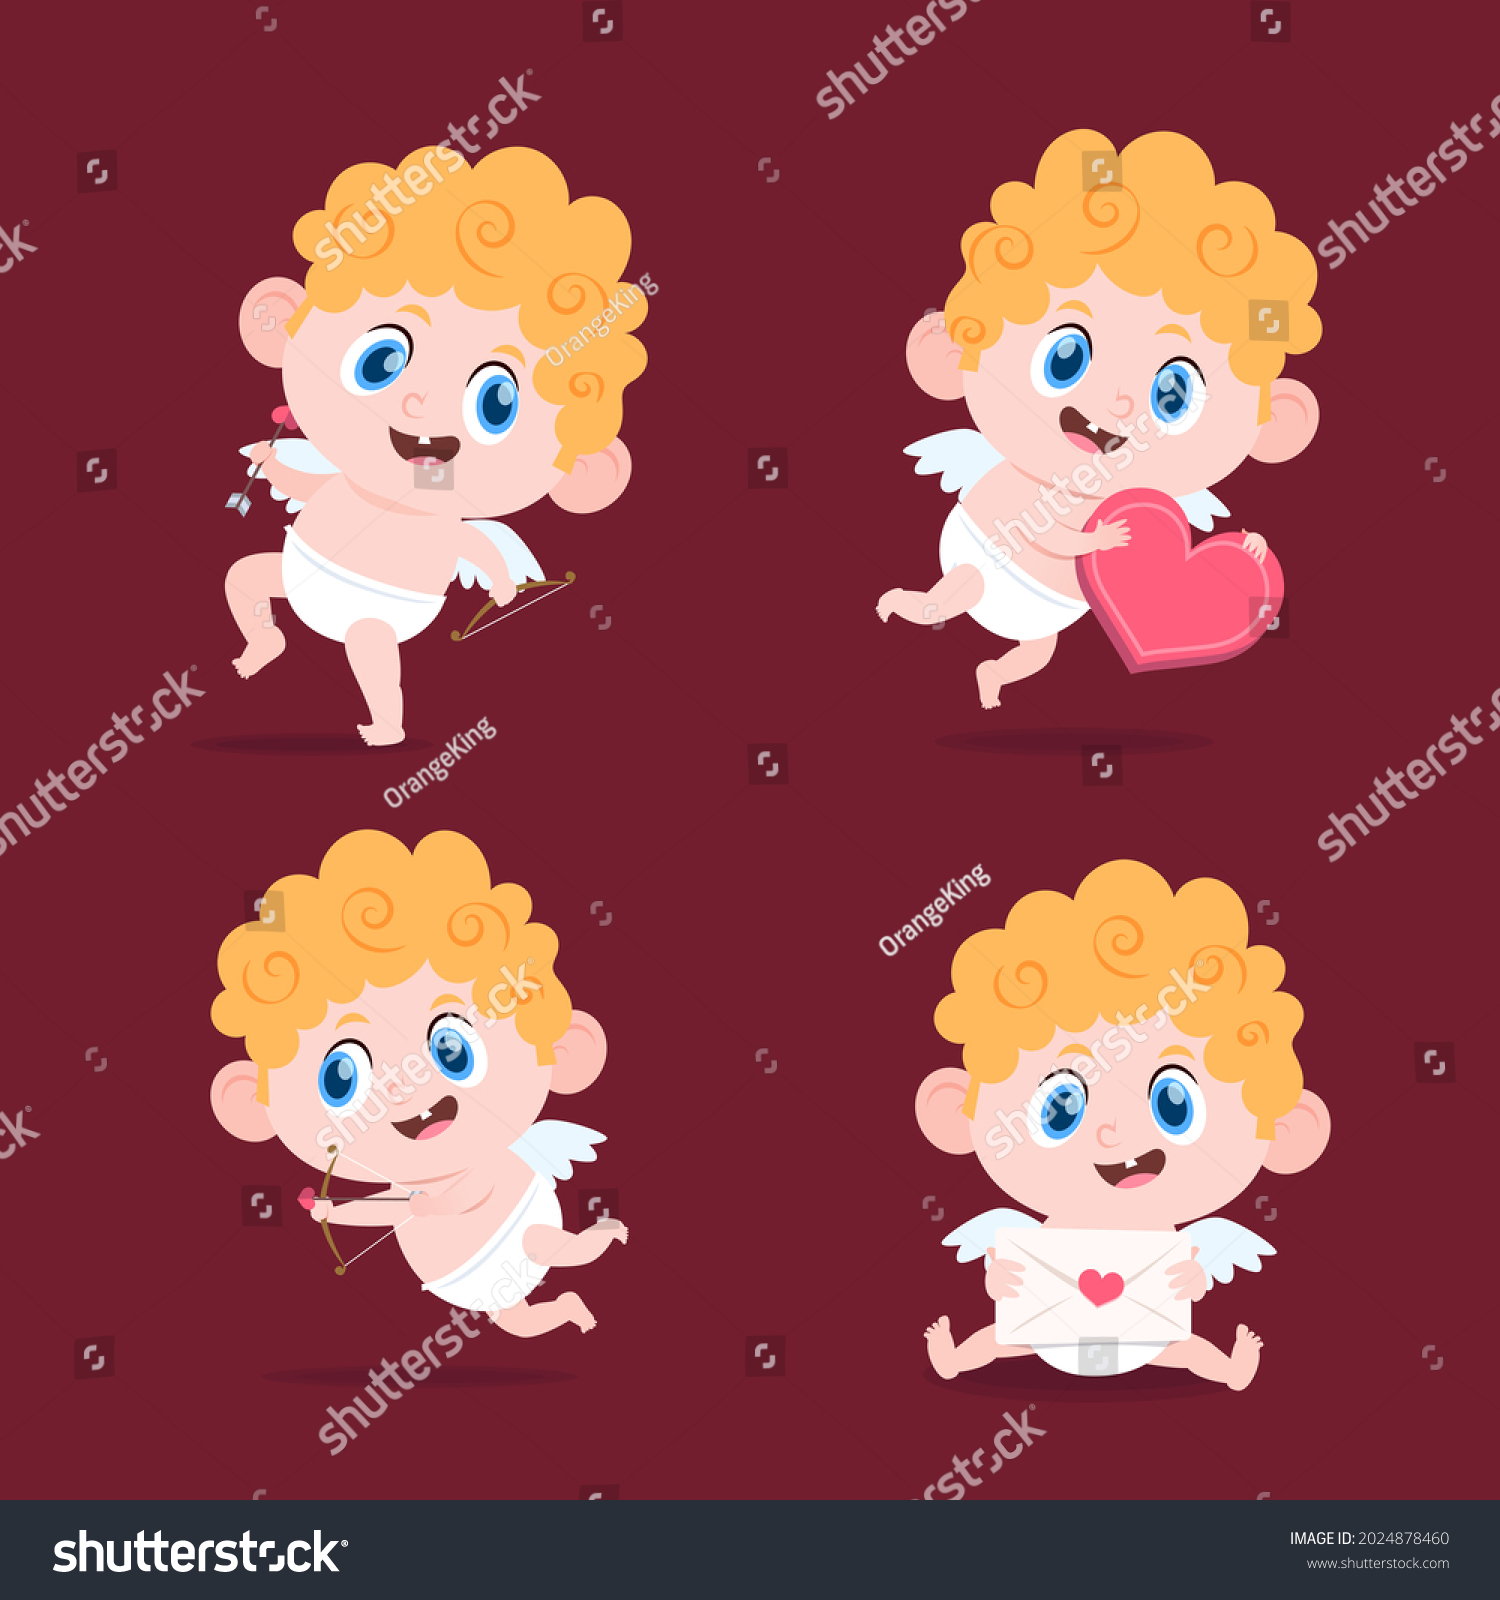 Cartoon Cupid Character Collection Angel Heart Stock Vector Royalty Free 2024878460 Shutterstock 0180